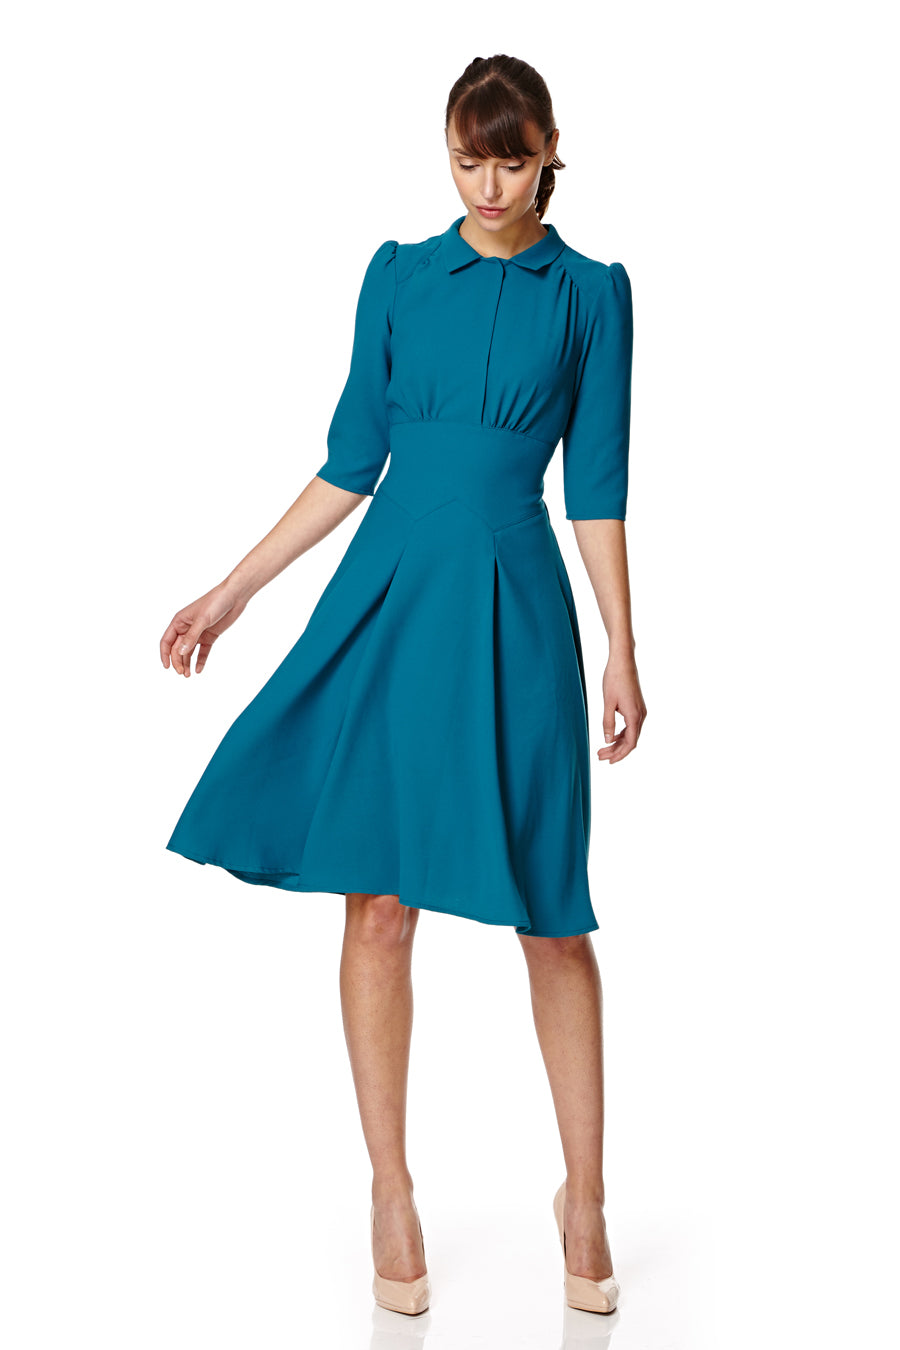 The Dorothy dress in teal crepe